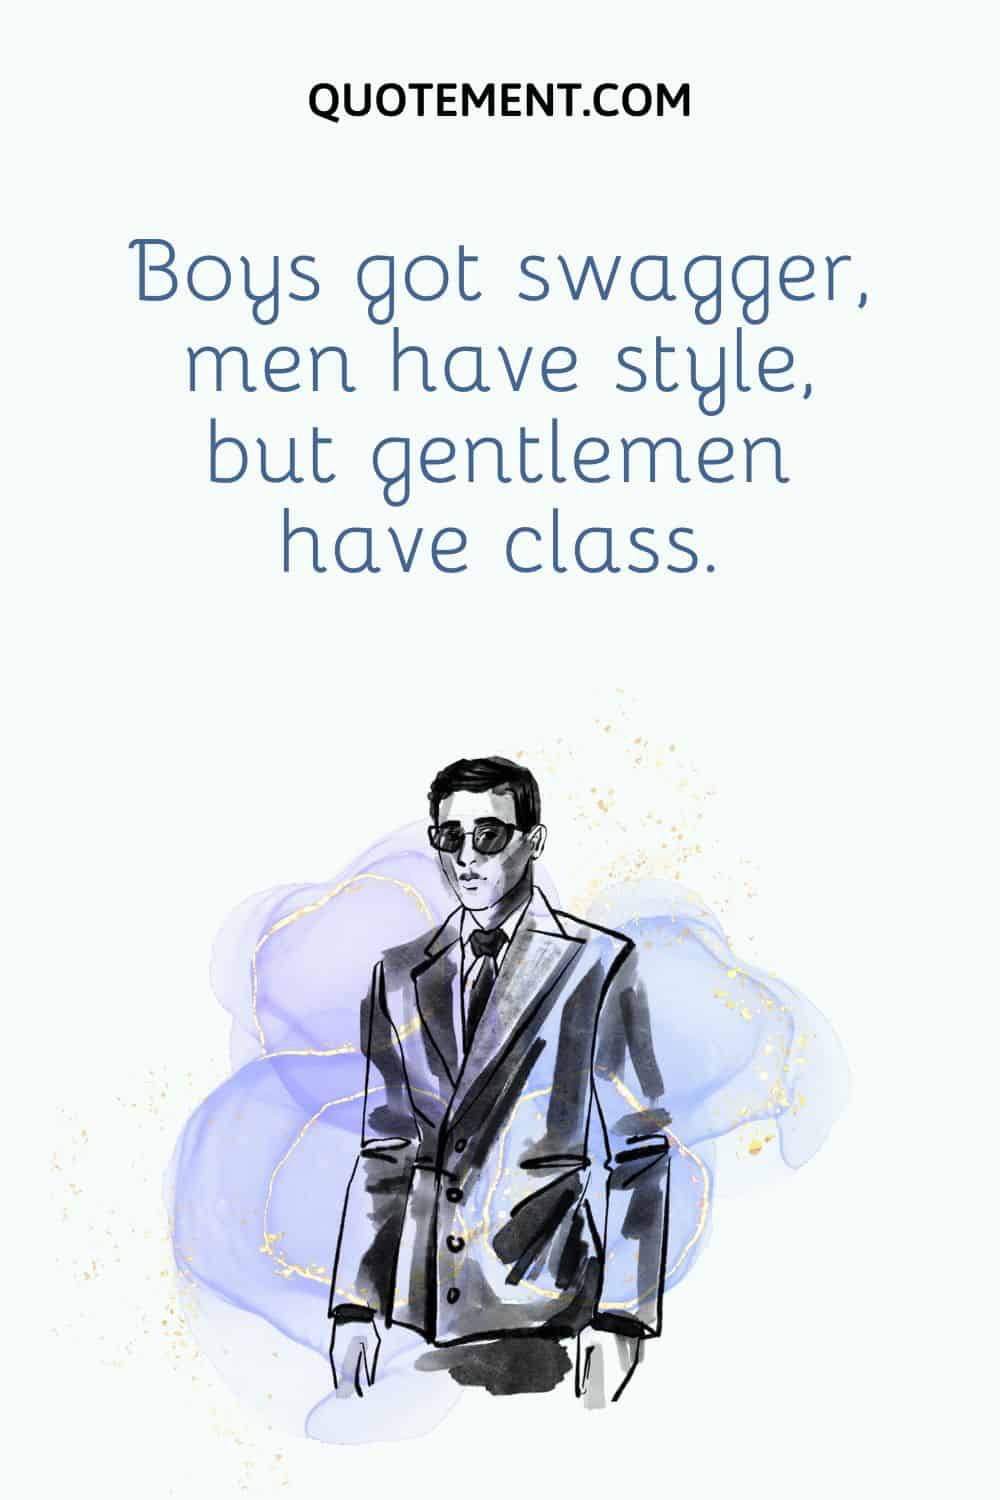 Boys got swagger, men have style, but gentlemen have class